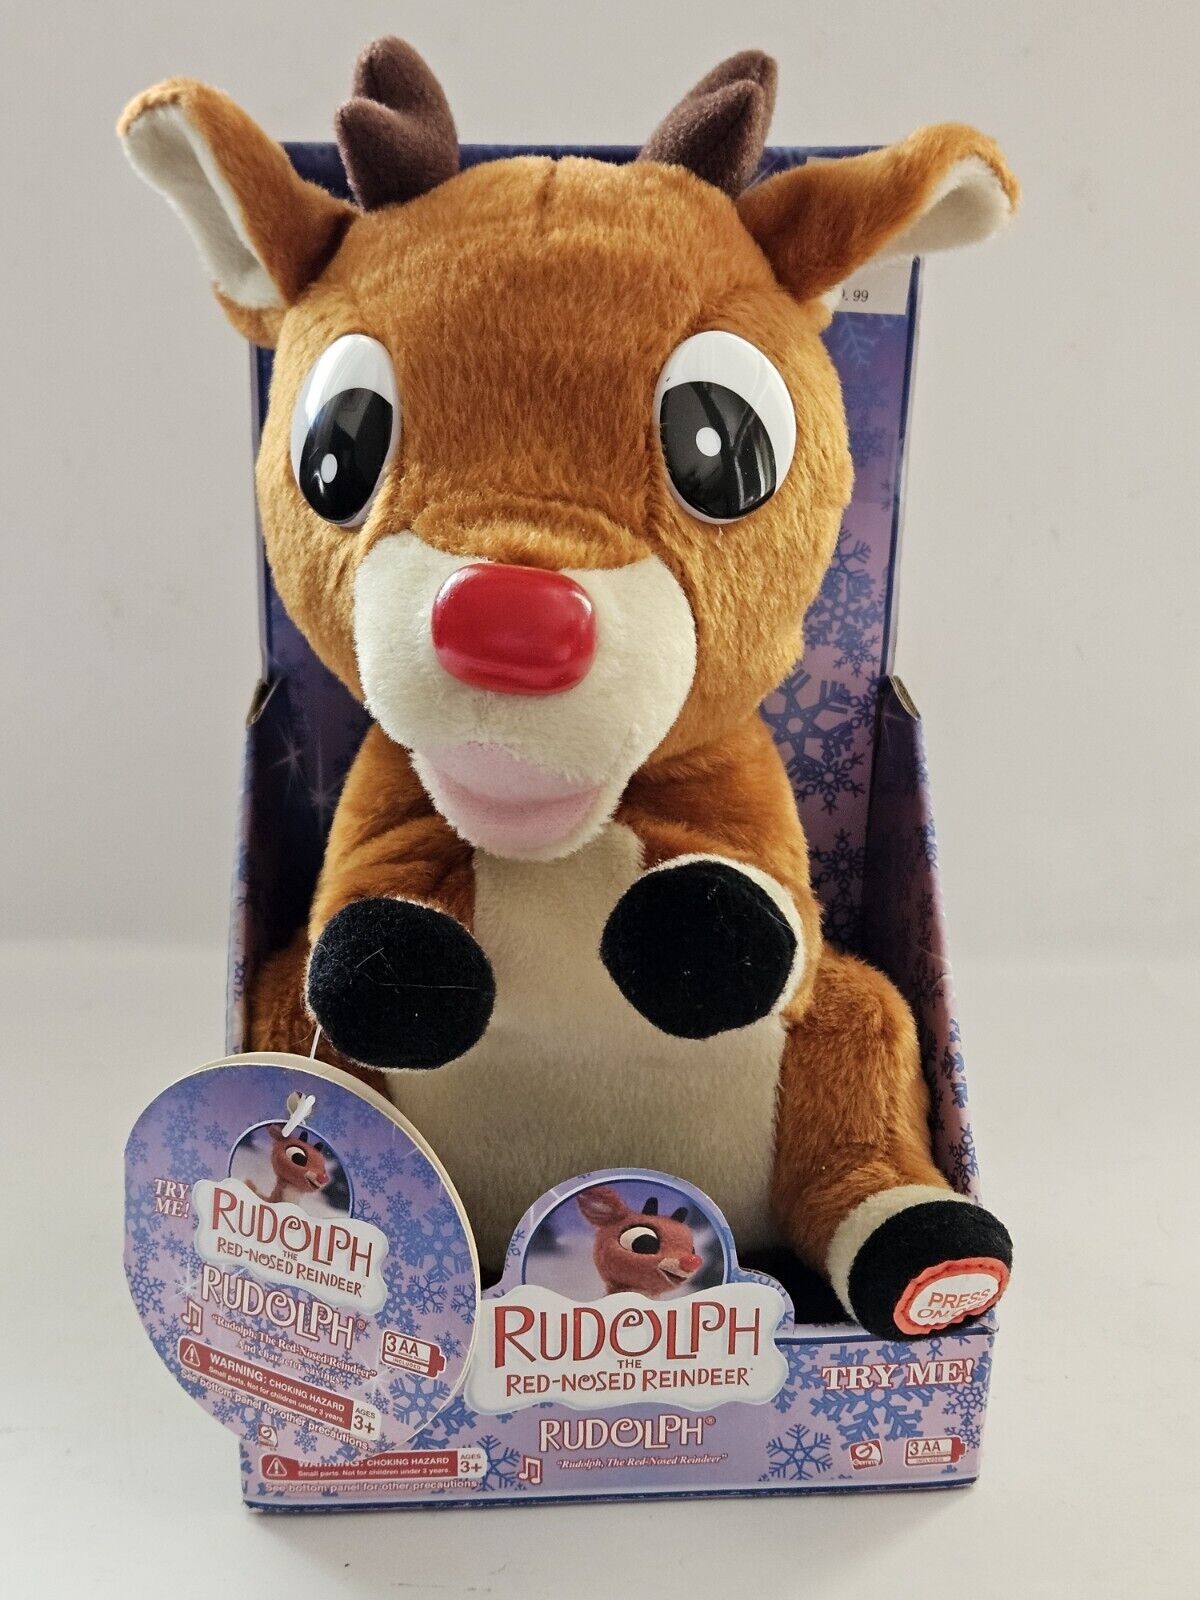 Rudolph the Red-Nosed Reindeer 2004 Gemmy Plush New in Original Box Works VIDEO